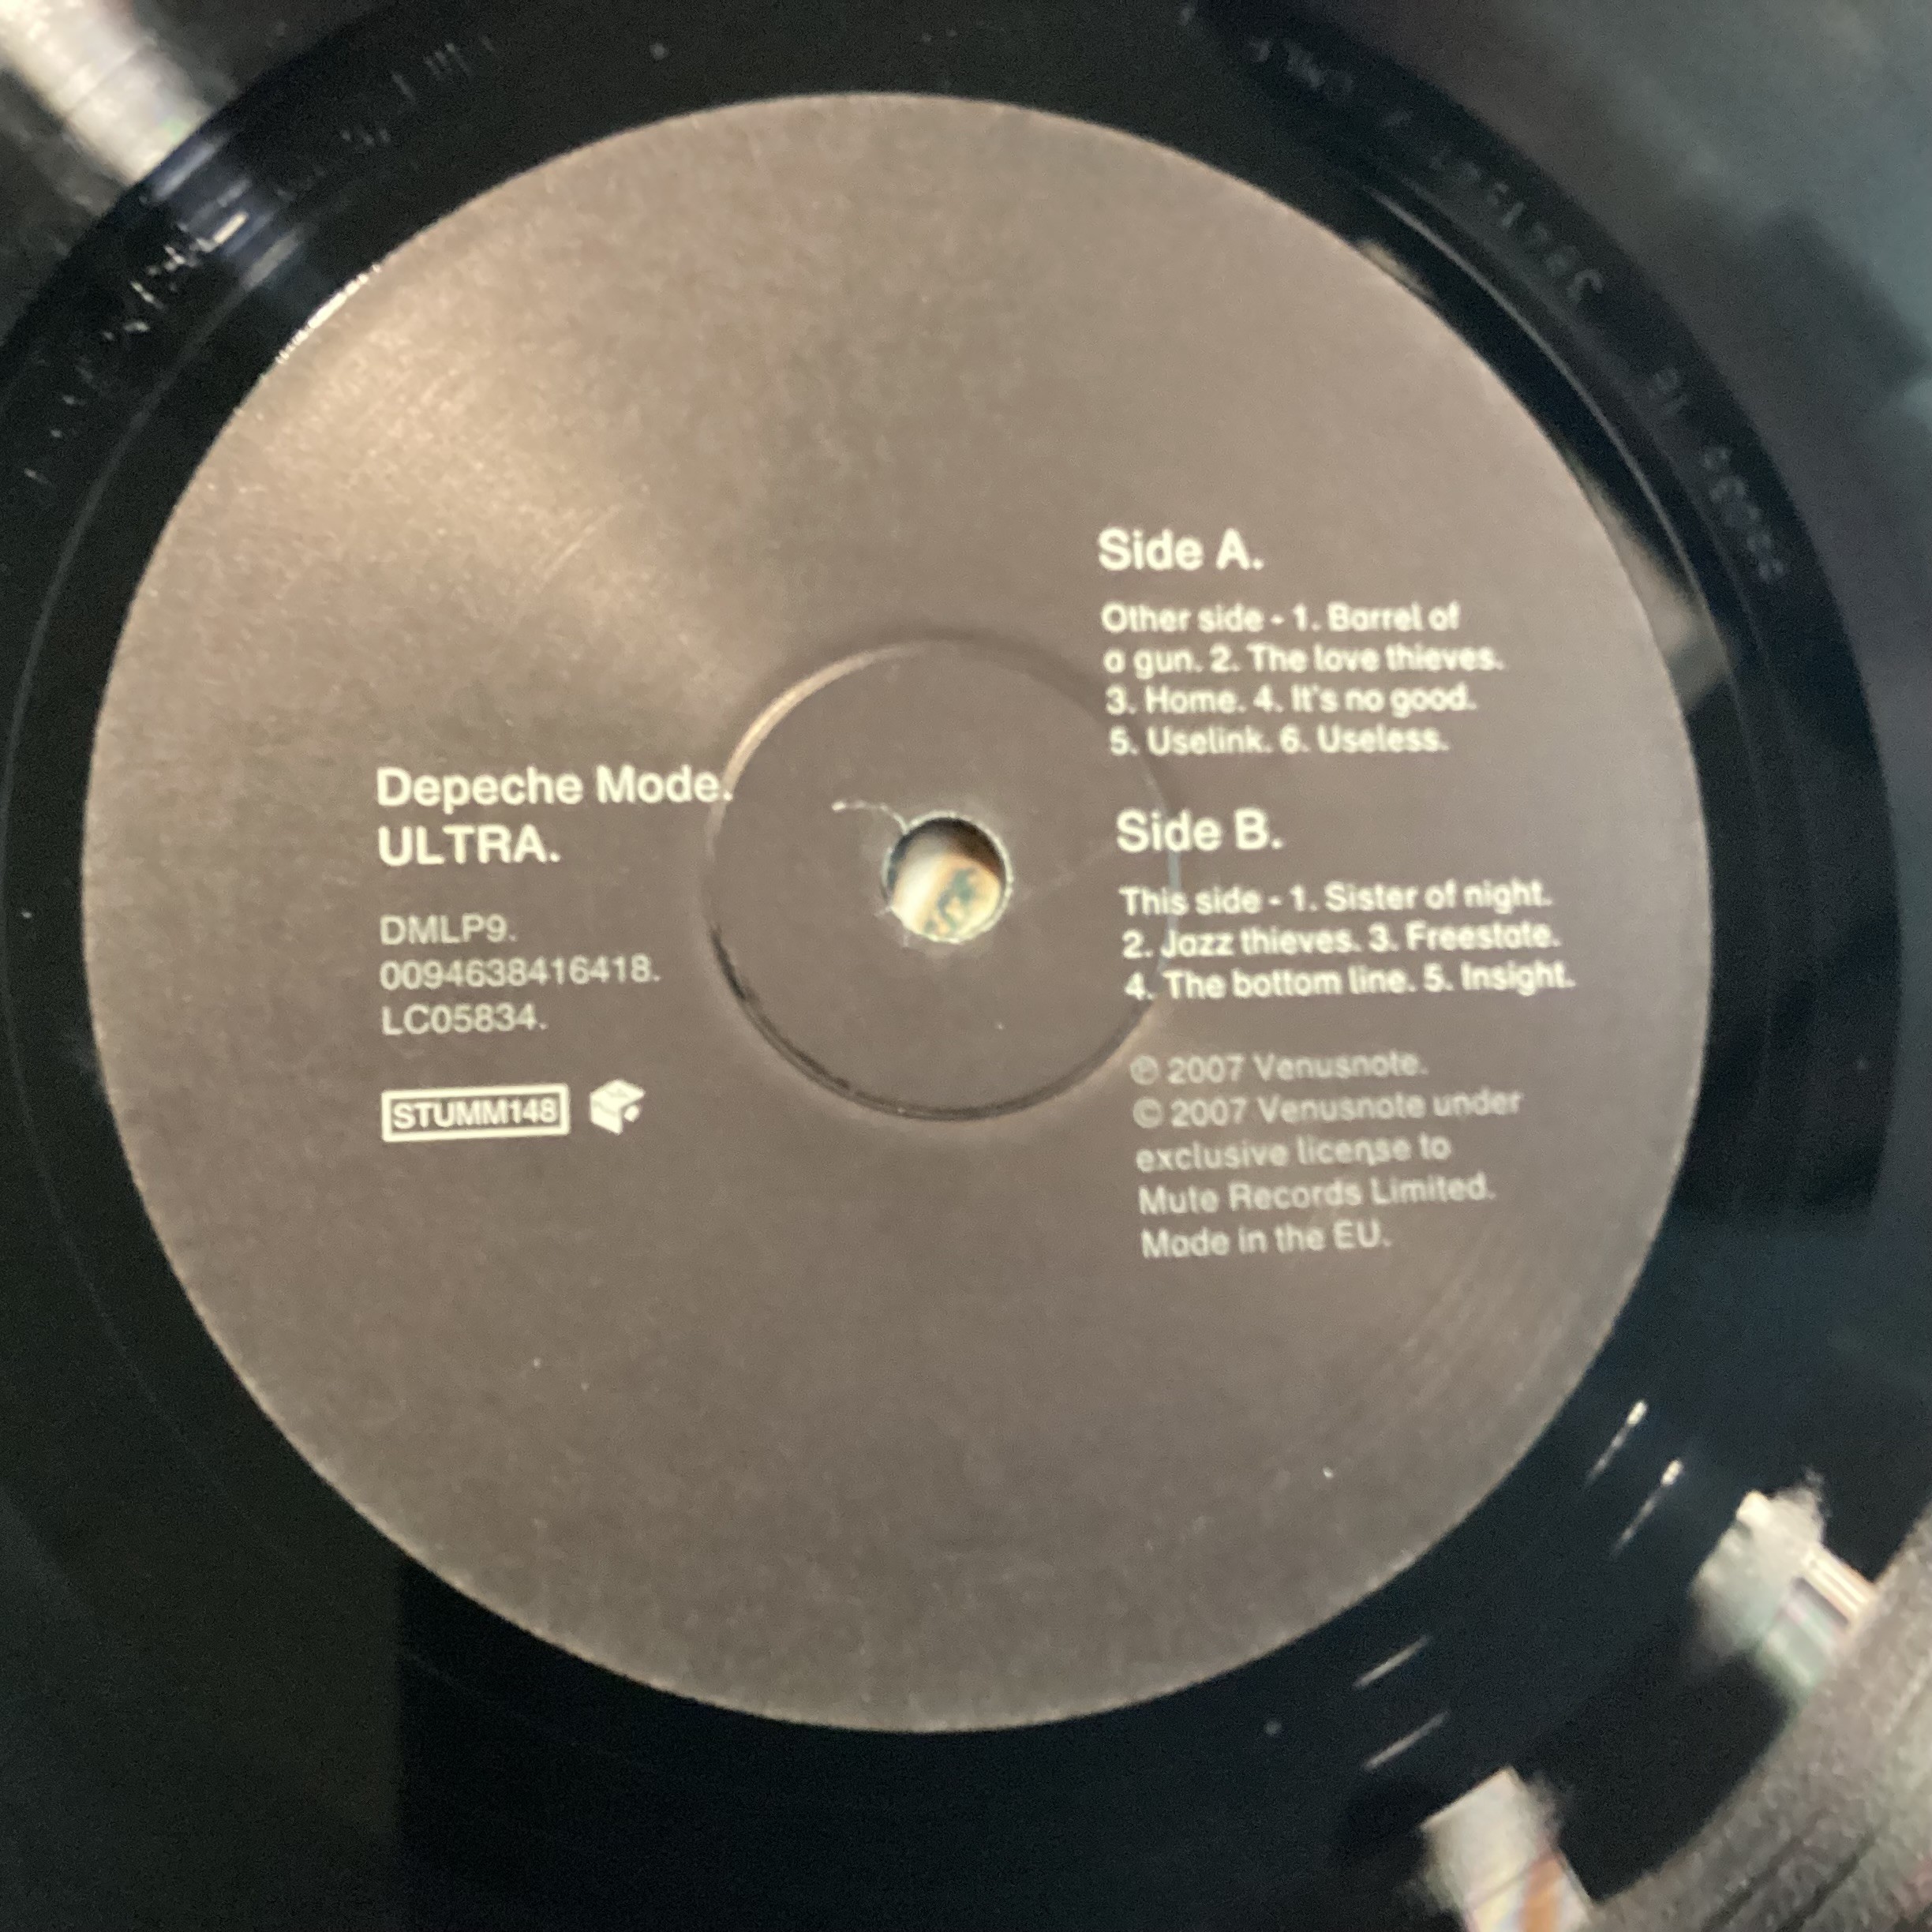 DEPECHE MODE VINYL LP ‘ULTRA’. A 2007 release of this gatefold sleeved record on Mute Records - Image 4 of 5